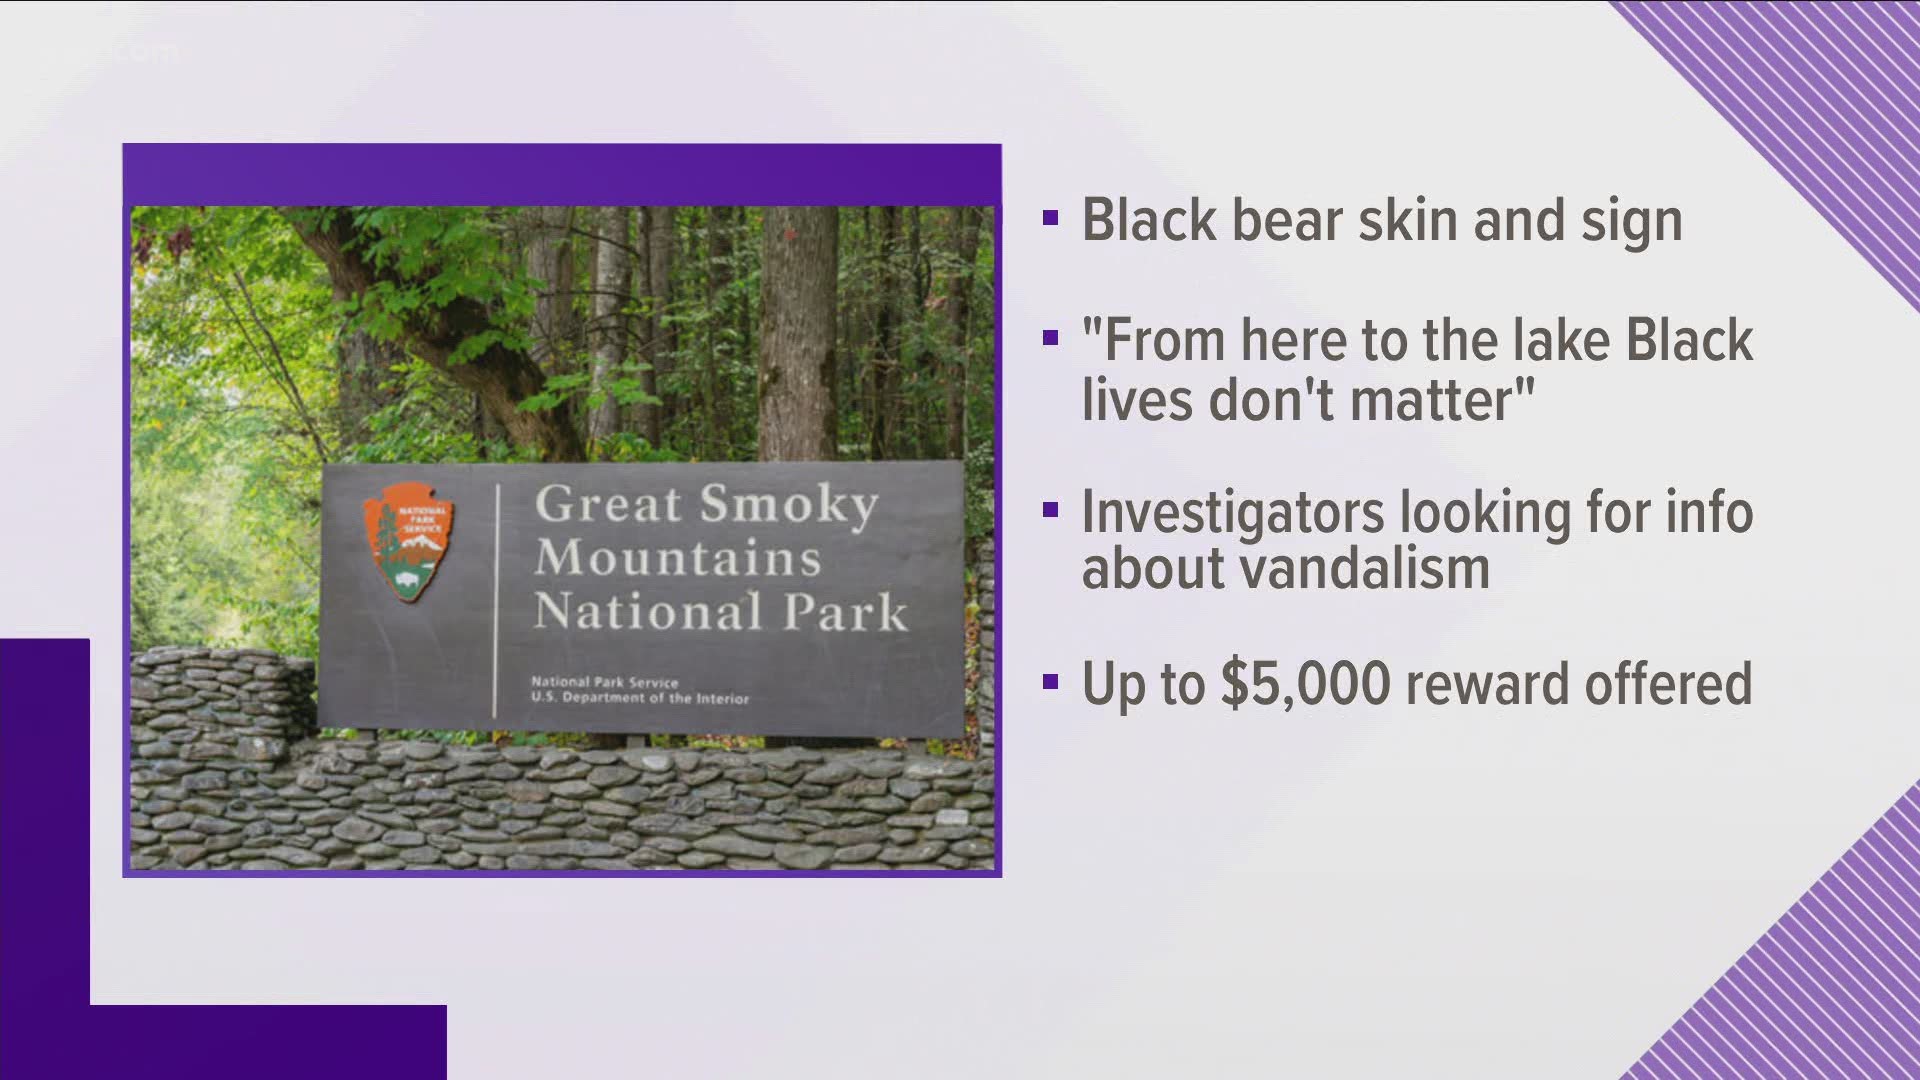 On Saturday, visitors reported seeing a black bear skin and a cardboard sign attached to the entrance reading "from here to the lake black lives don't matter."